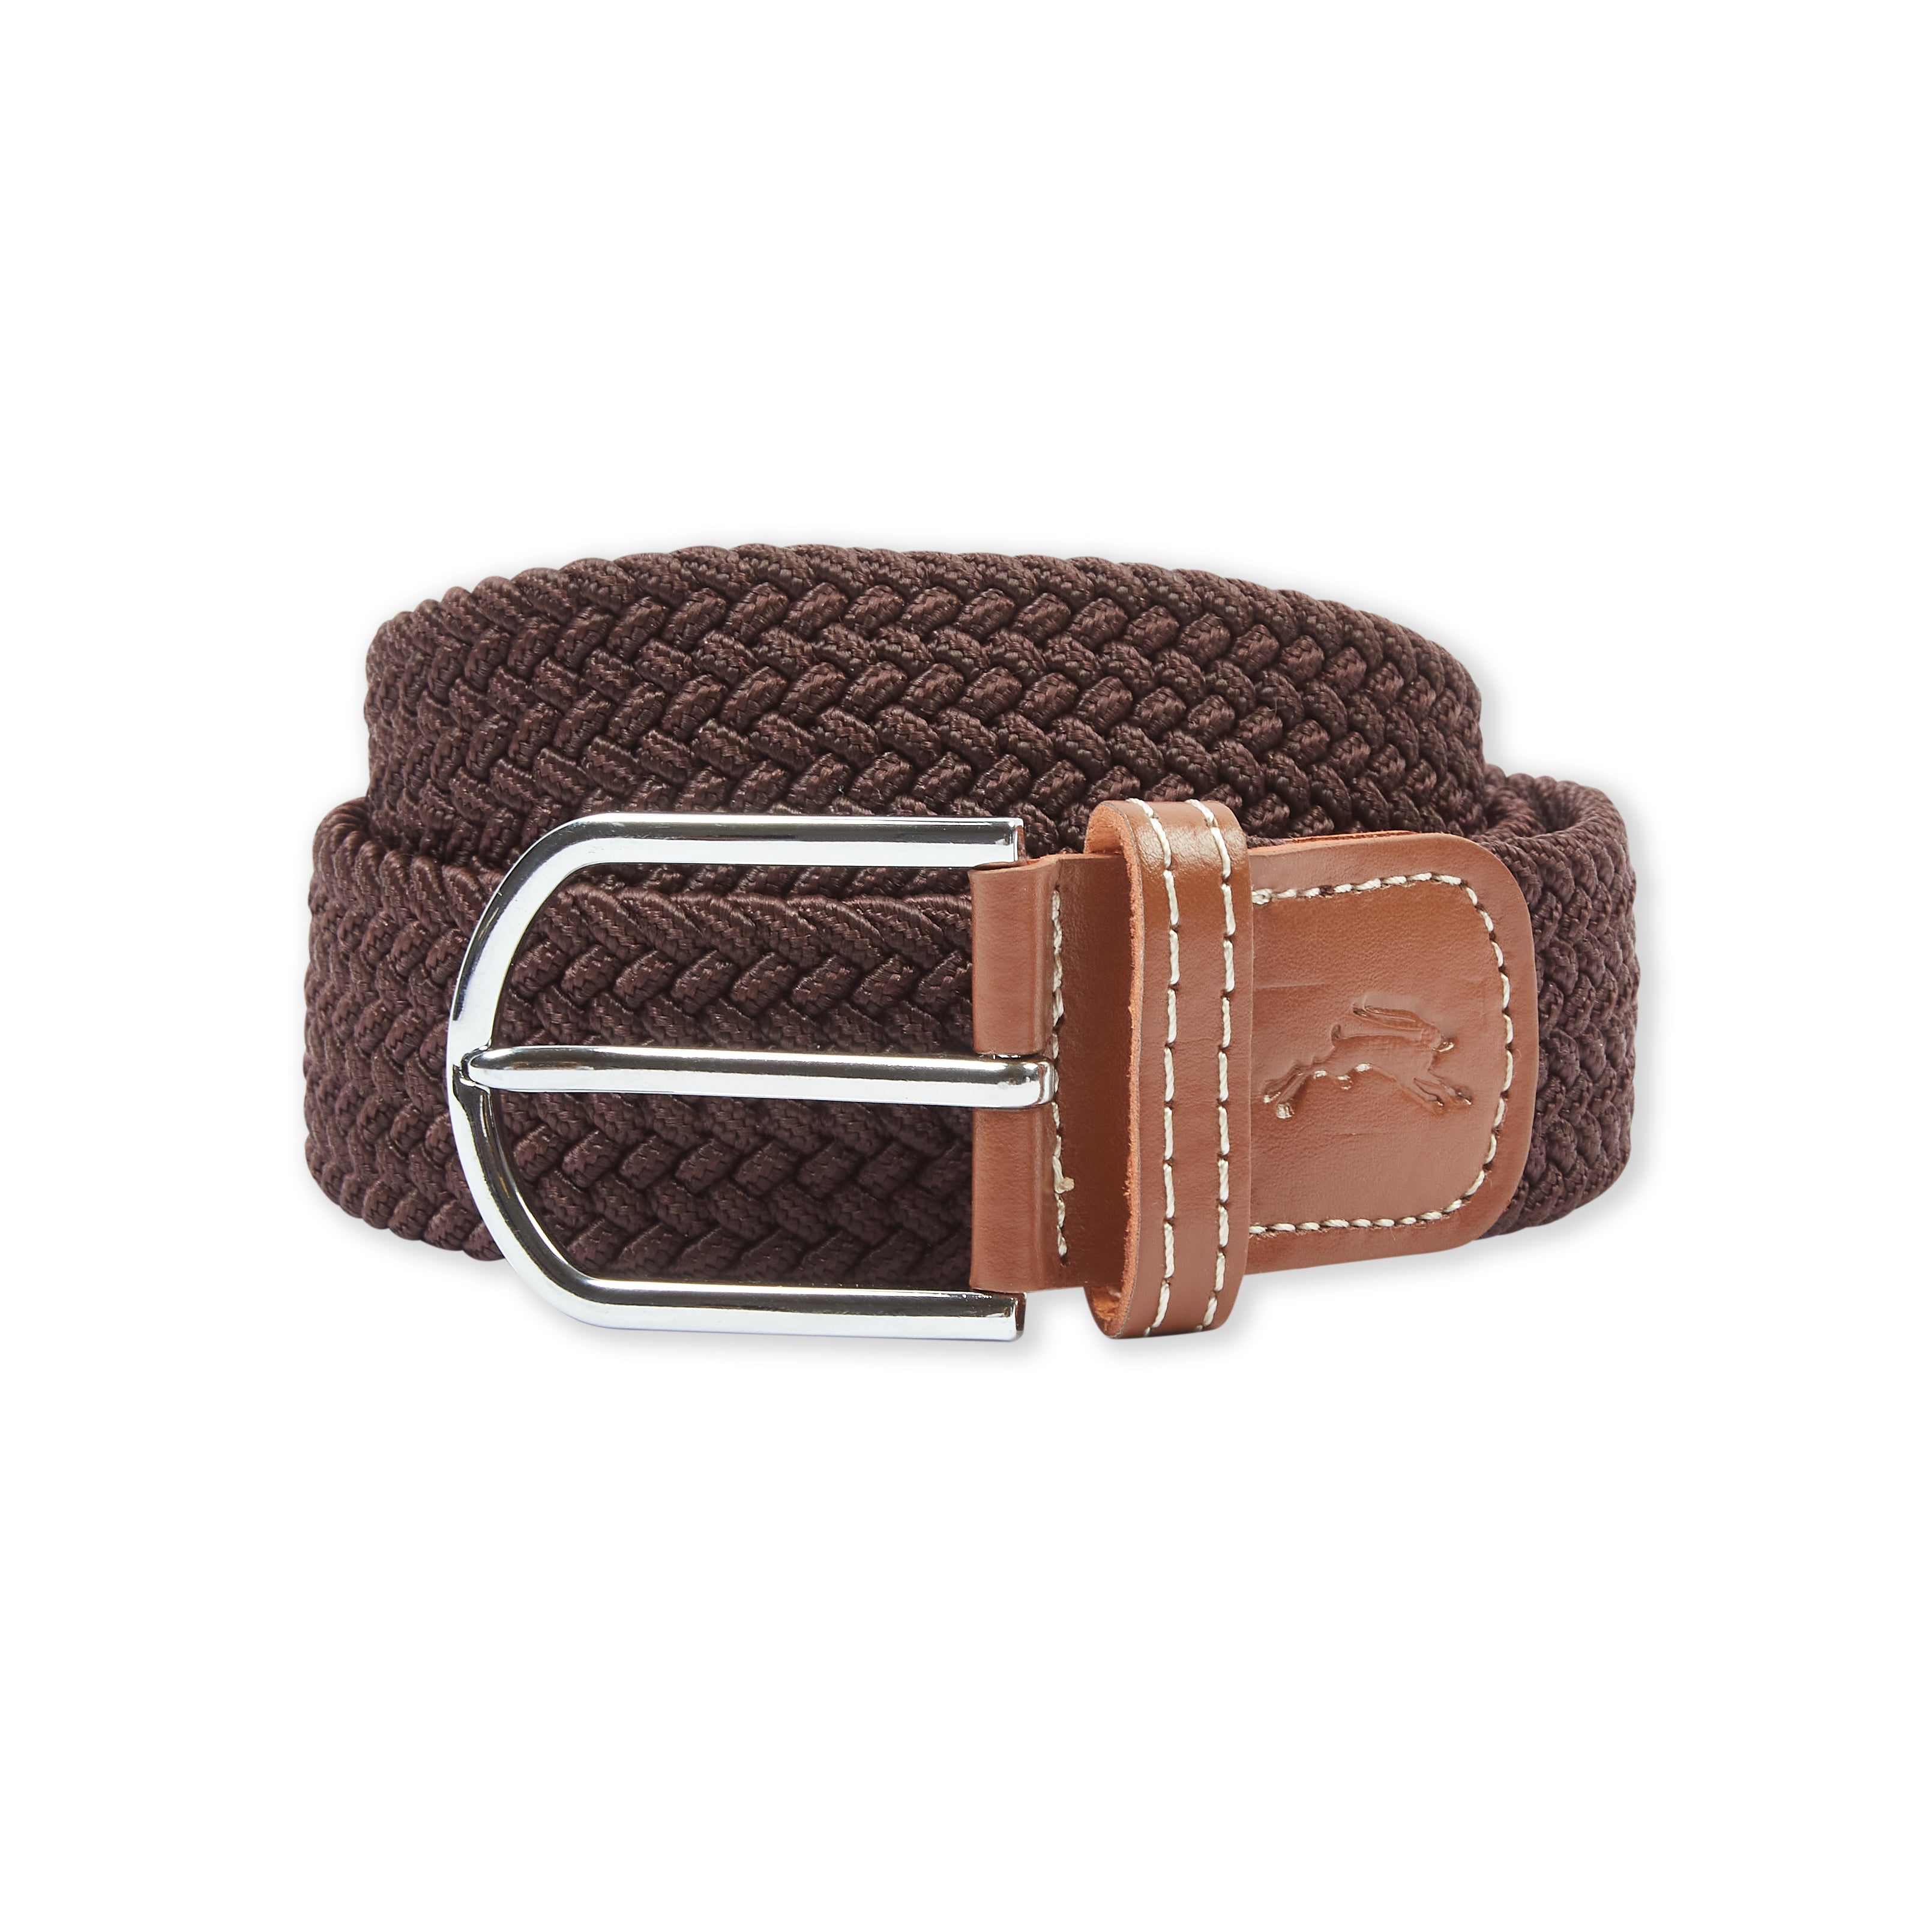 Burrows & Hare  One Size Woven Belt Dark Brown